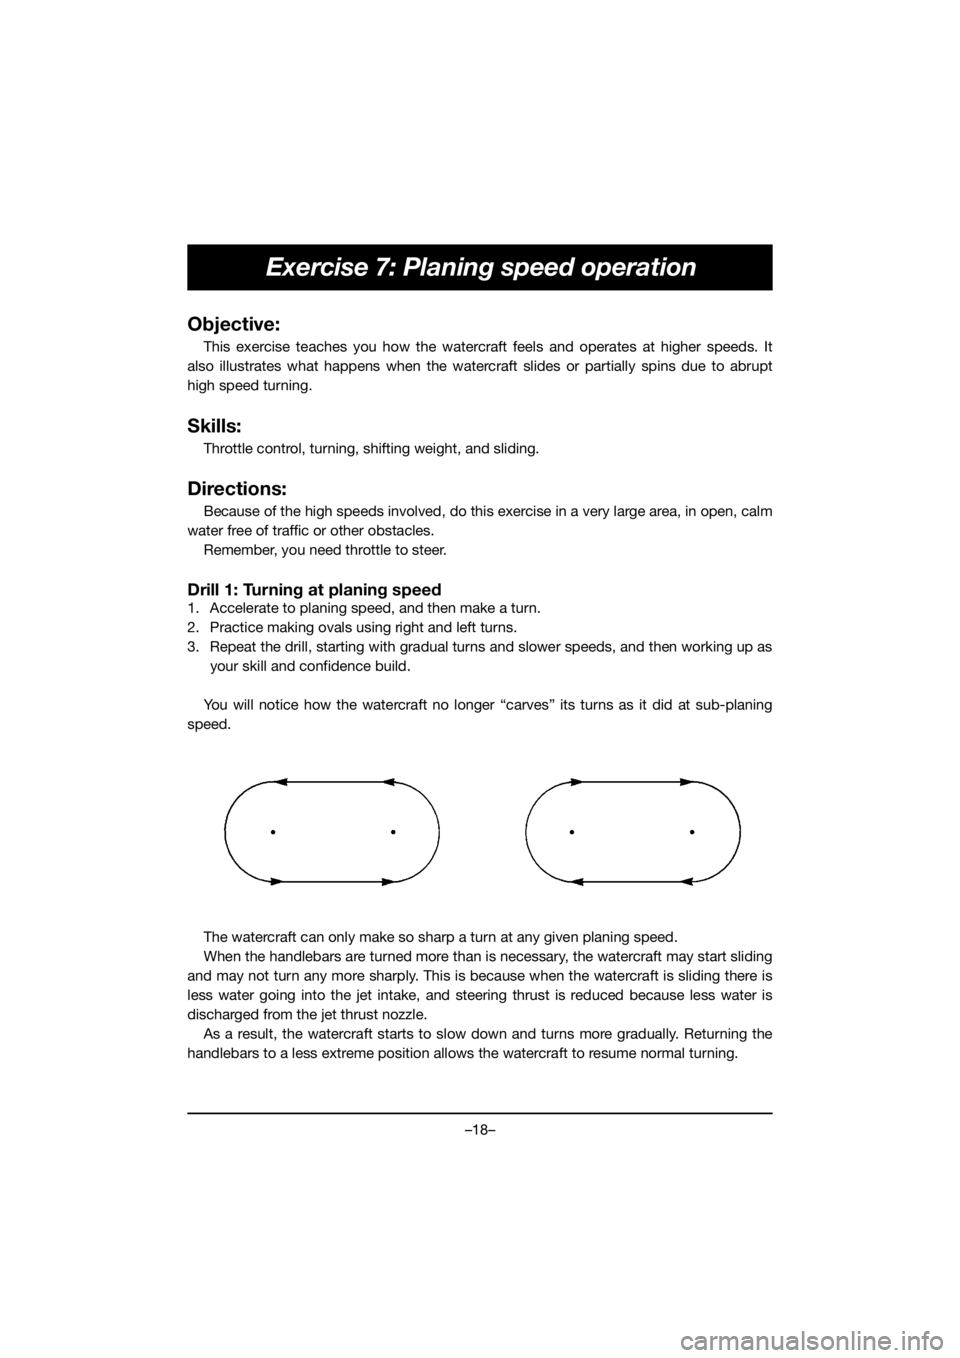 YAMAHA EXR 2020 Owners Manual –18–
Exercise 7: Planing speed operation 
Objective:
This exercise teaches you how the watercraft feels and operates at higher speeds. It
also illustrates what happens when the watercraft slides o